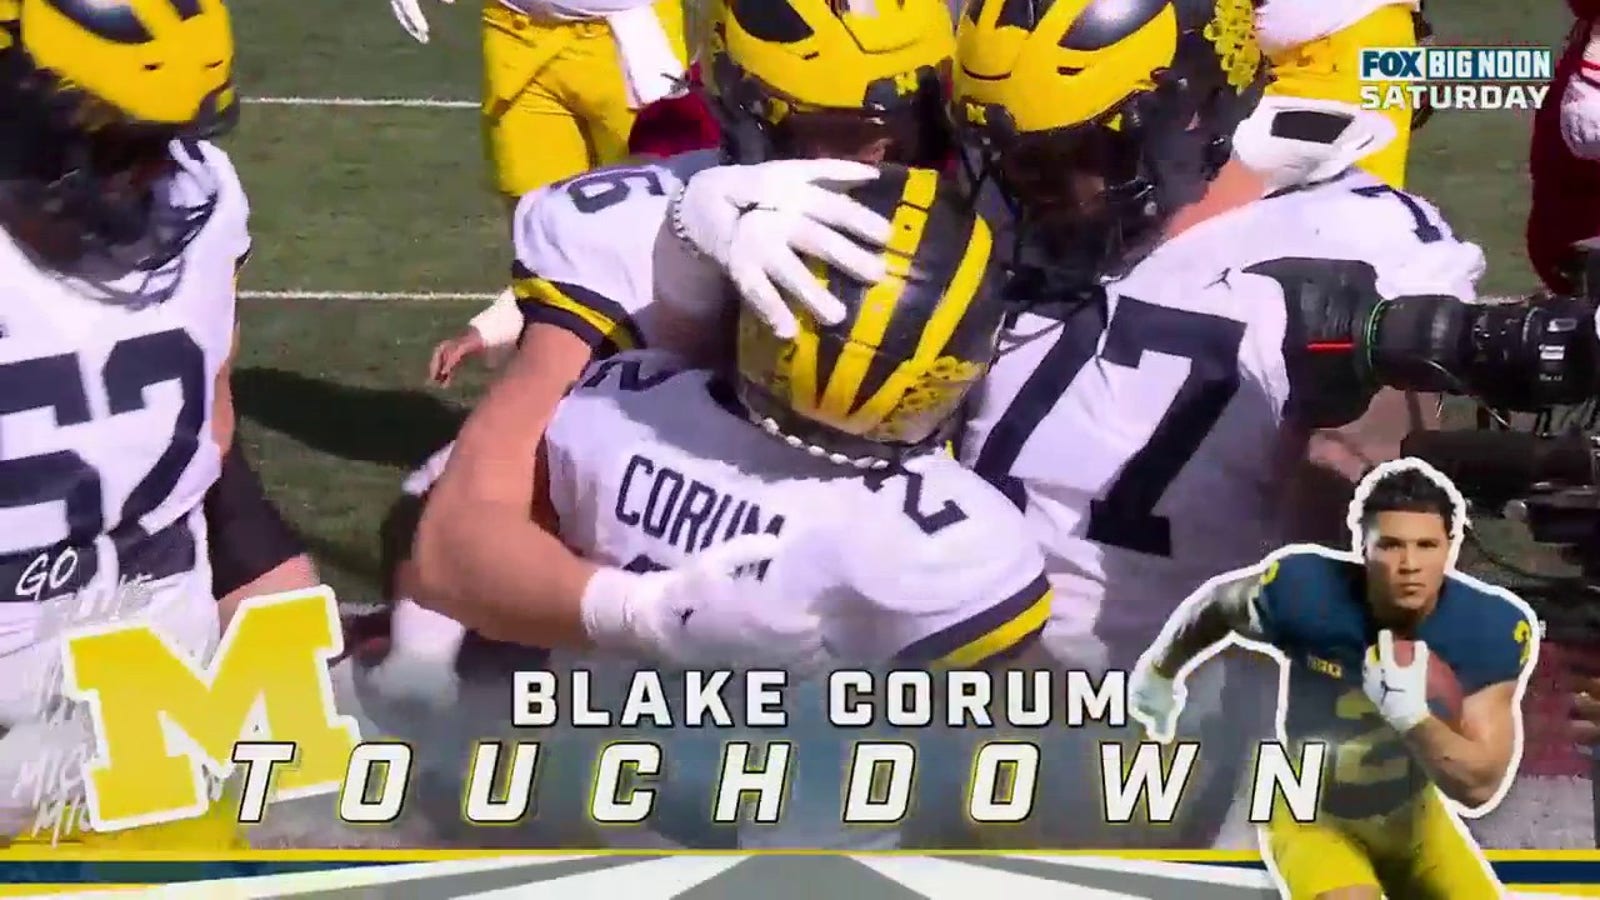 Blake Colm runs in for a 1-yard touchdown with Michigan leading 7-0.